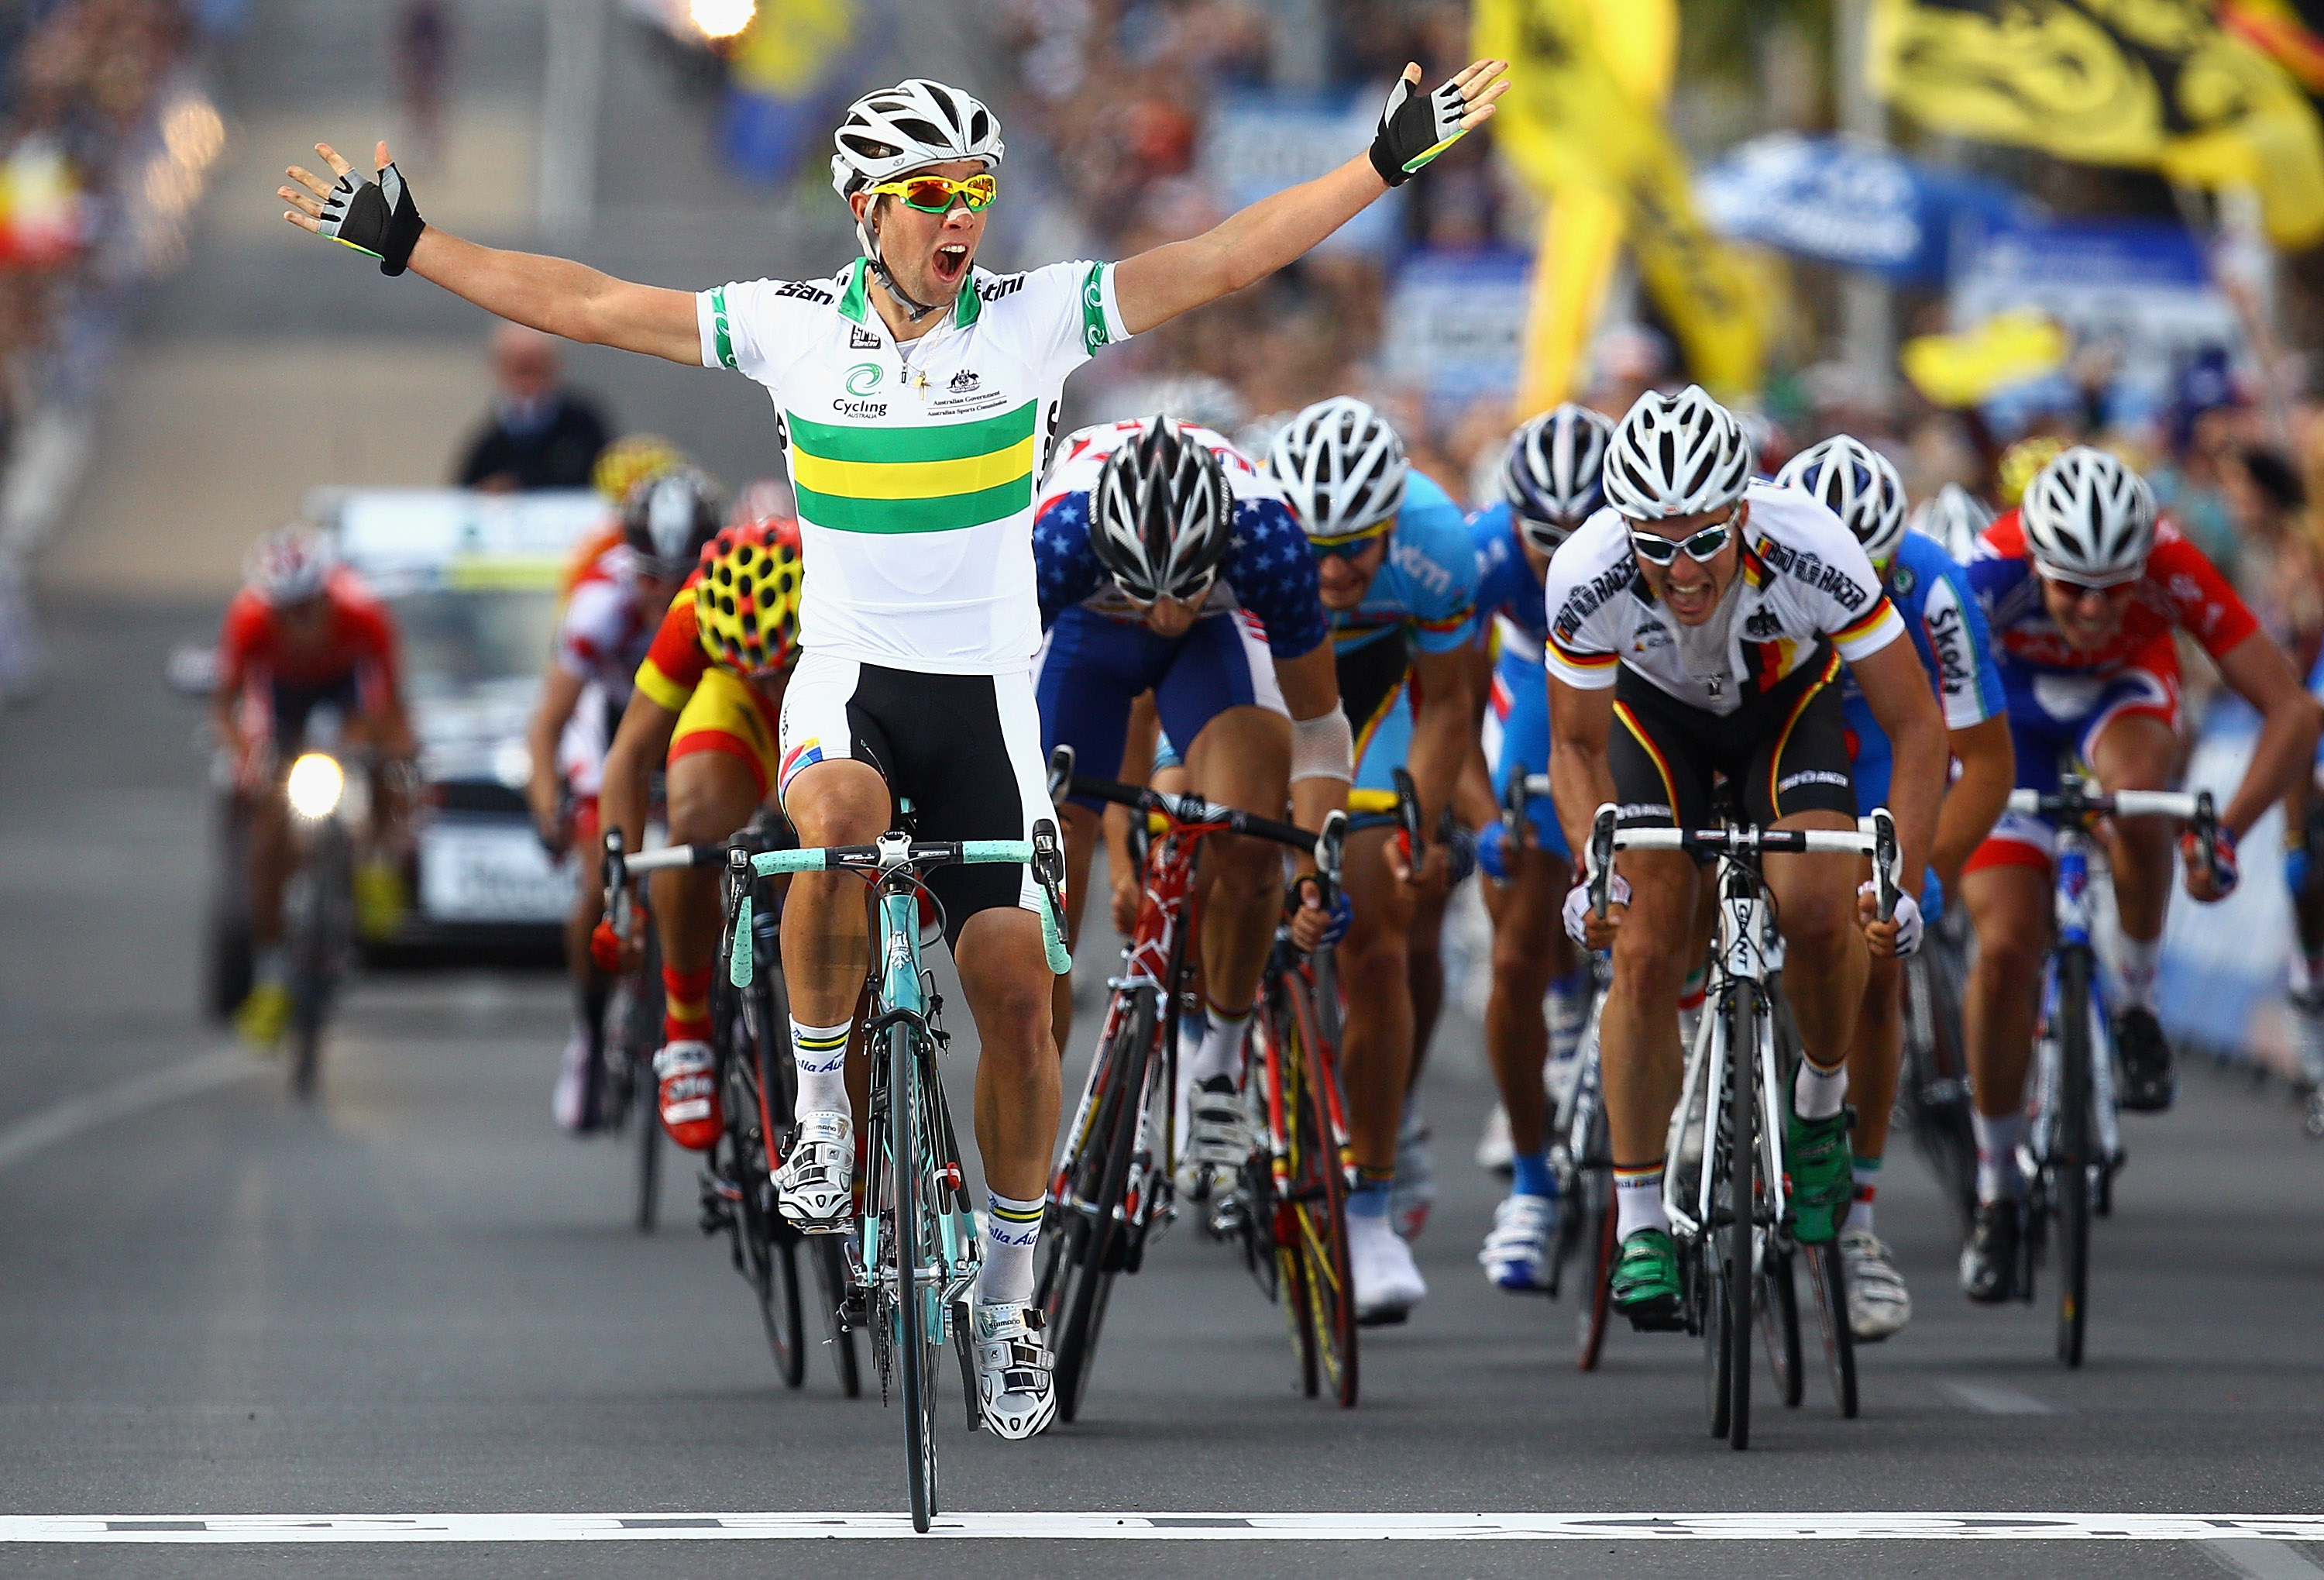 Michael Matthews of Australia celebrates winning the under-23 road race at the 2010 UCI Road World Championships in Geelong.